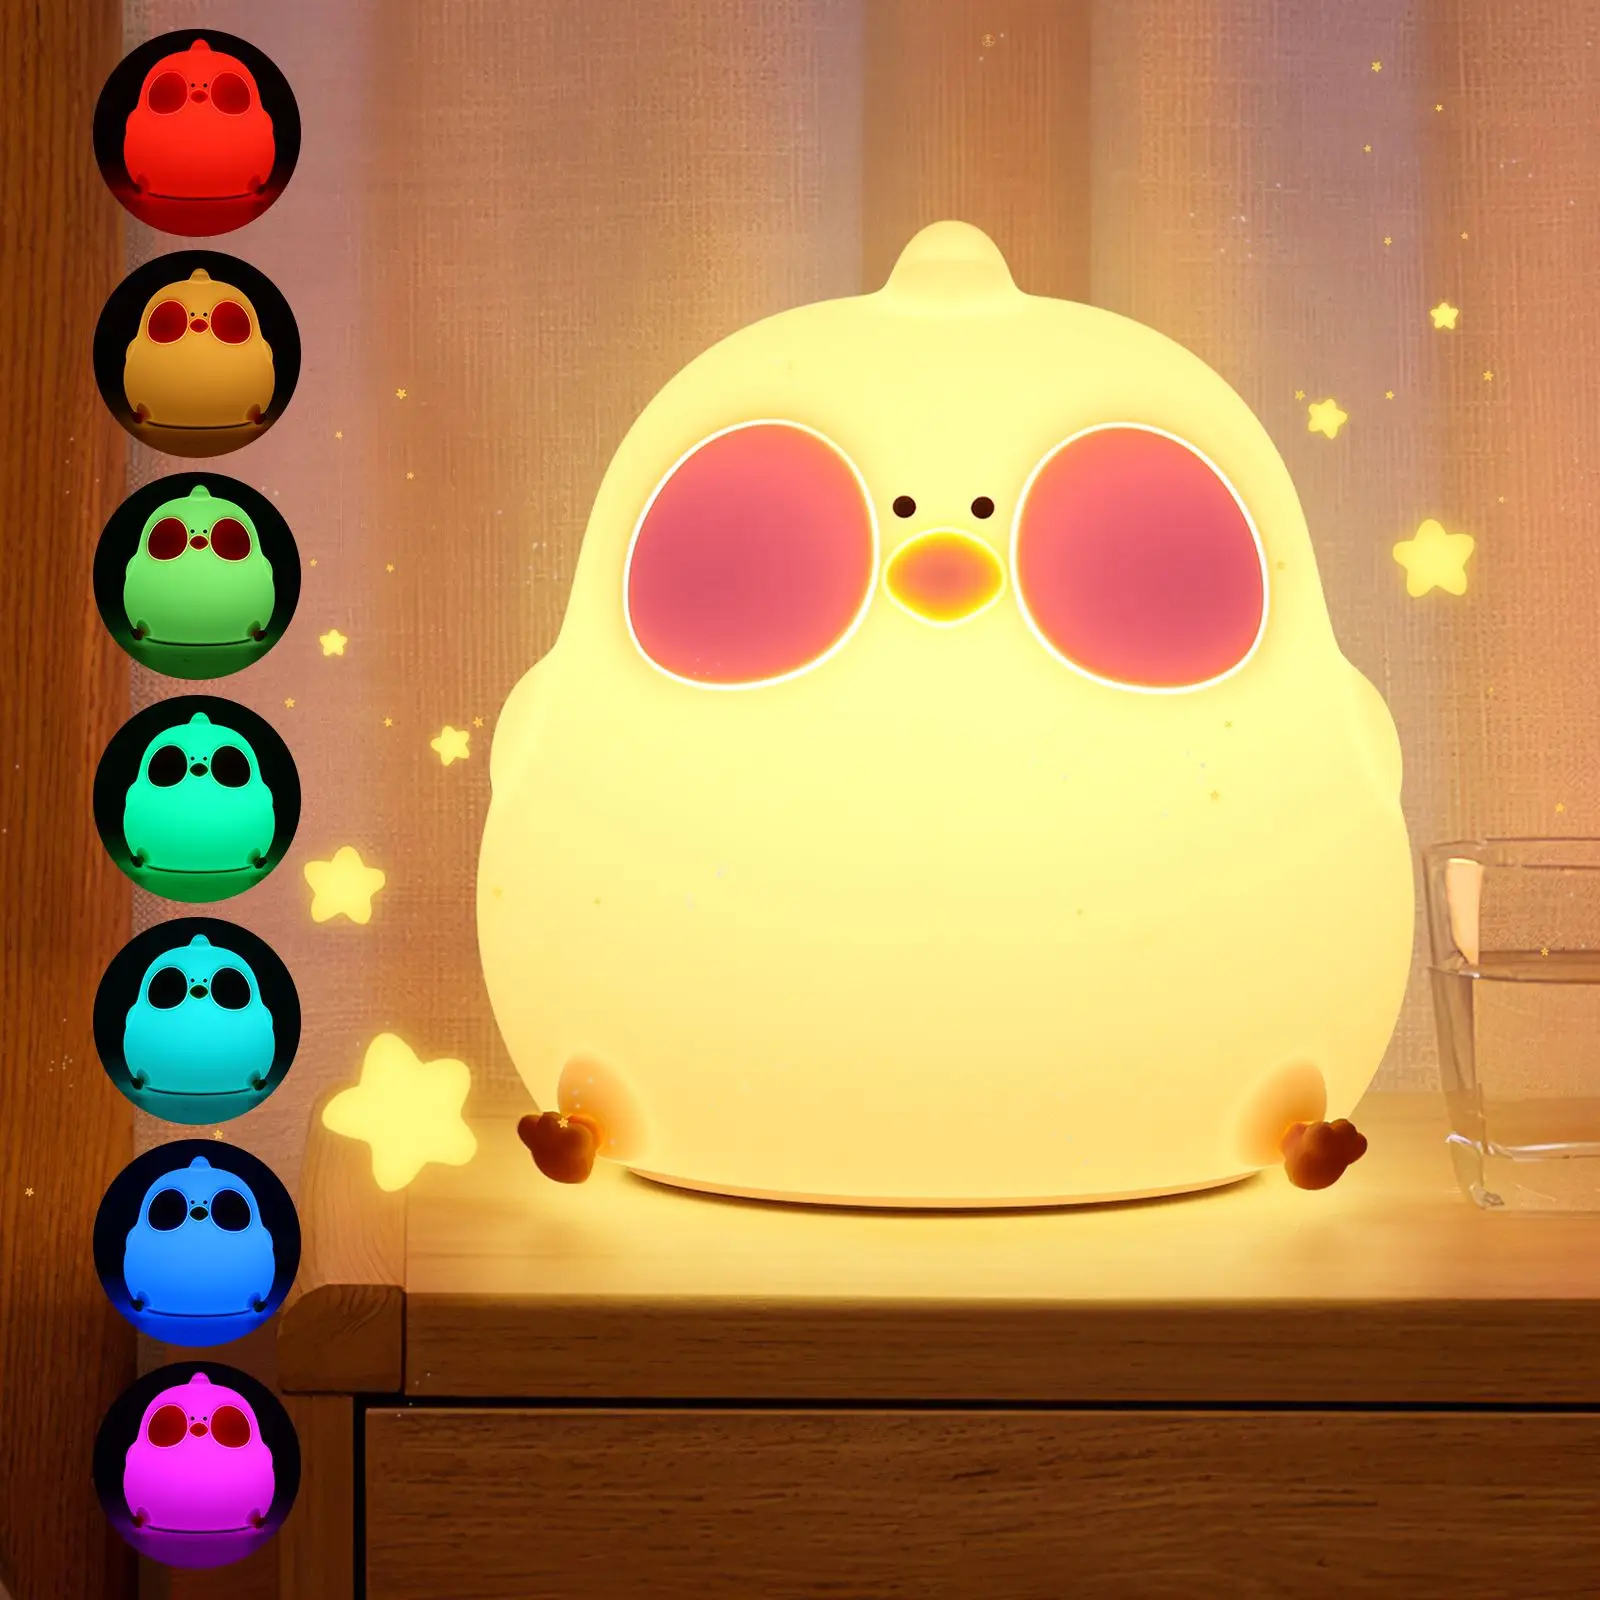 

Cute LED Night Light Cartoon Silicone Chick USB Rechargeable Sleeping Light Touch Sensor Timing Bedroom Bedside Lamp Kid Gift